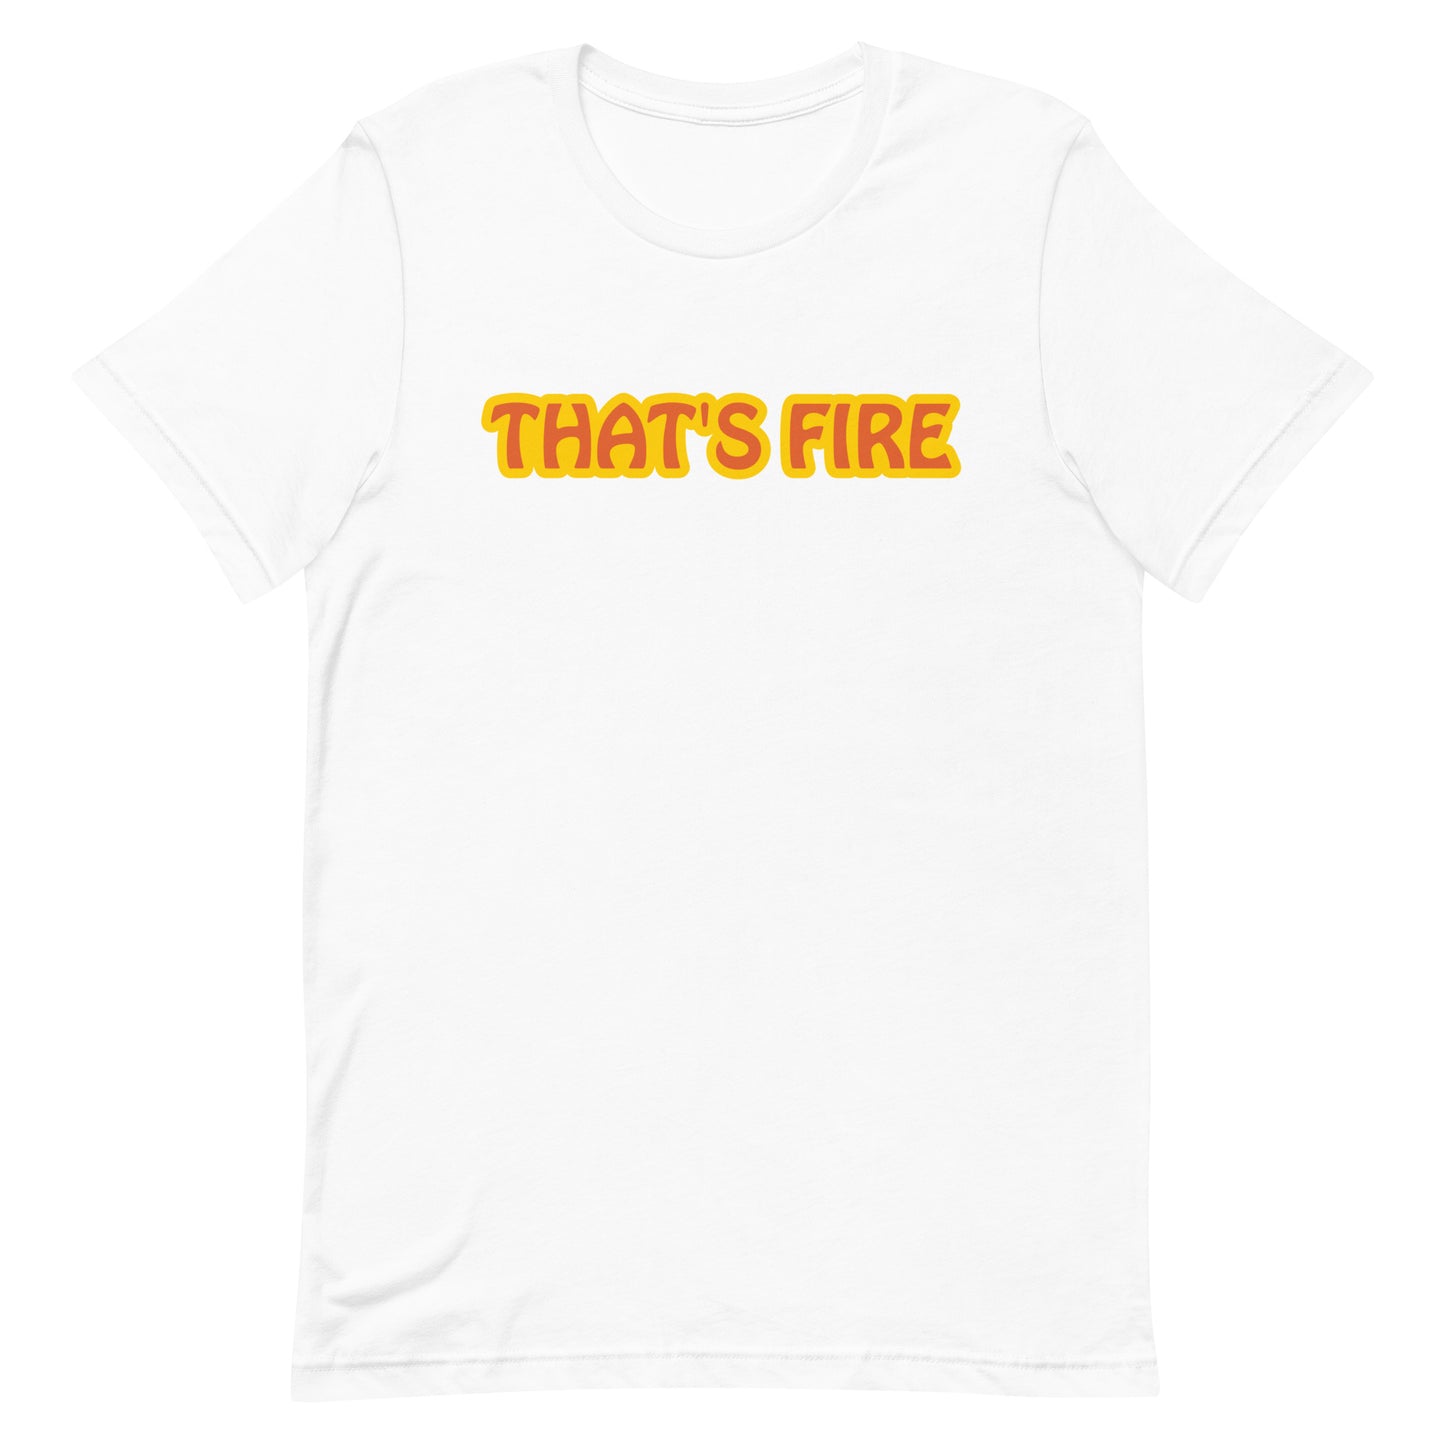 White t shirt with that's fire text on white background